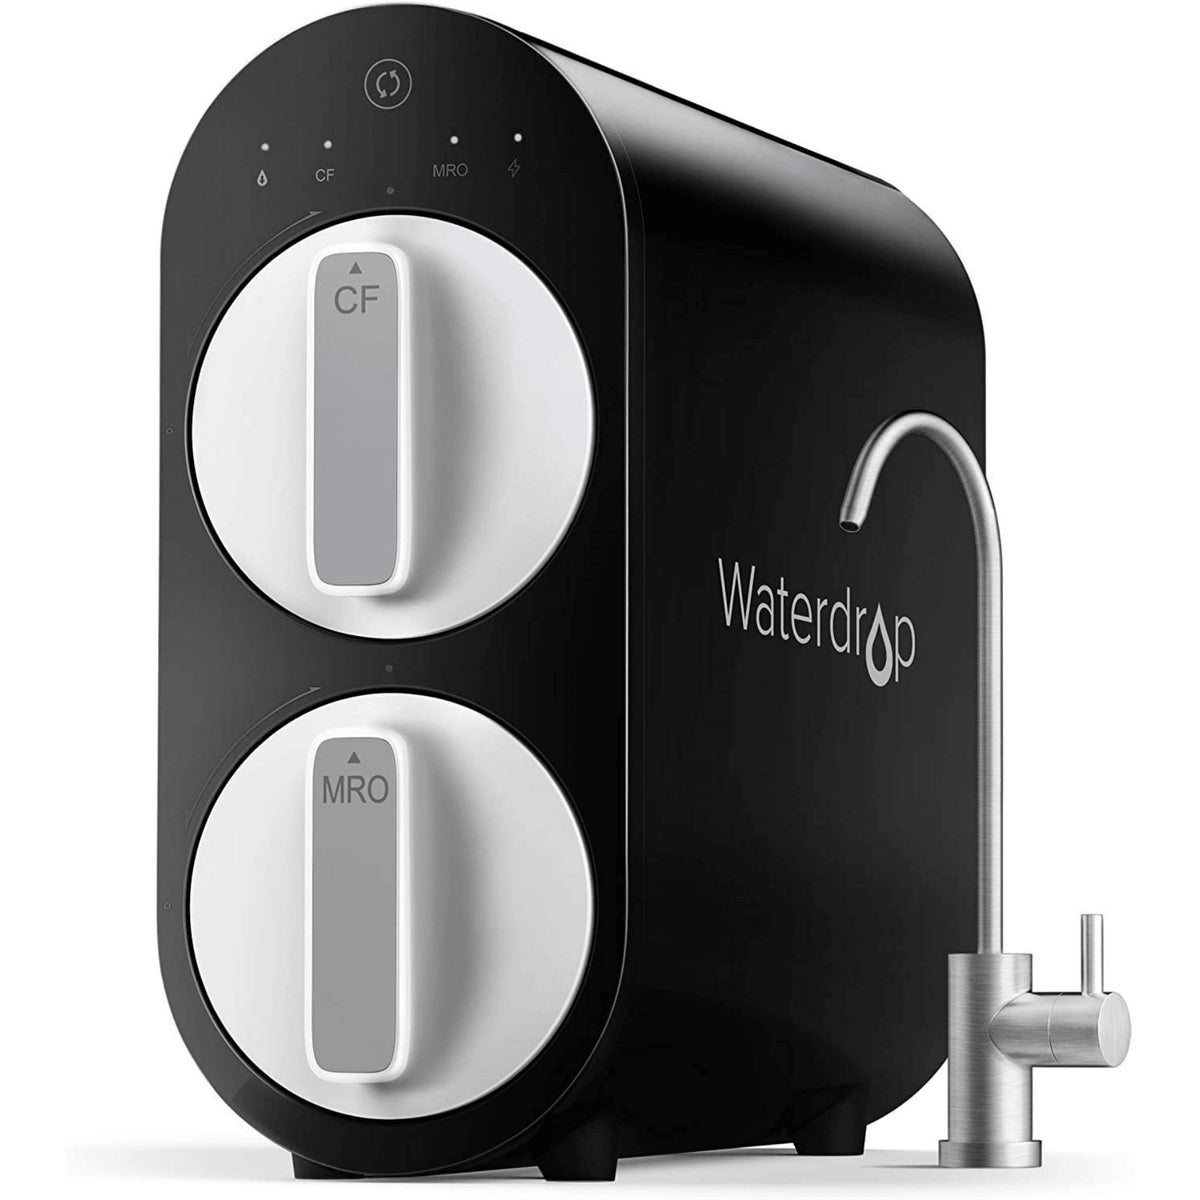 Waterdrop G3 RO System 1-year Combo Sets